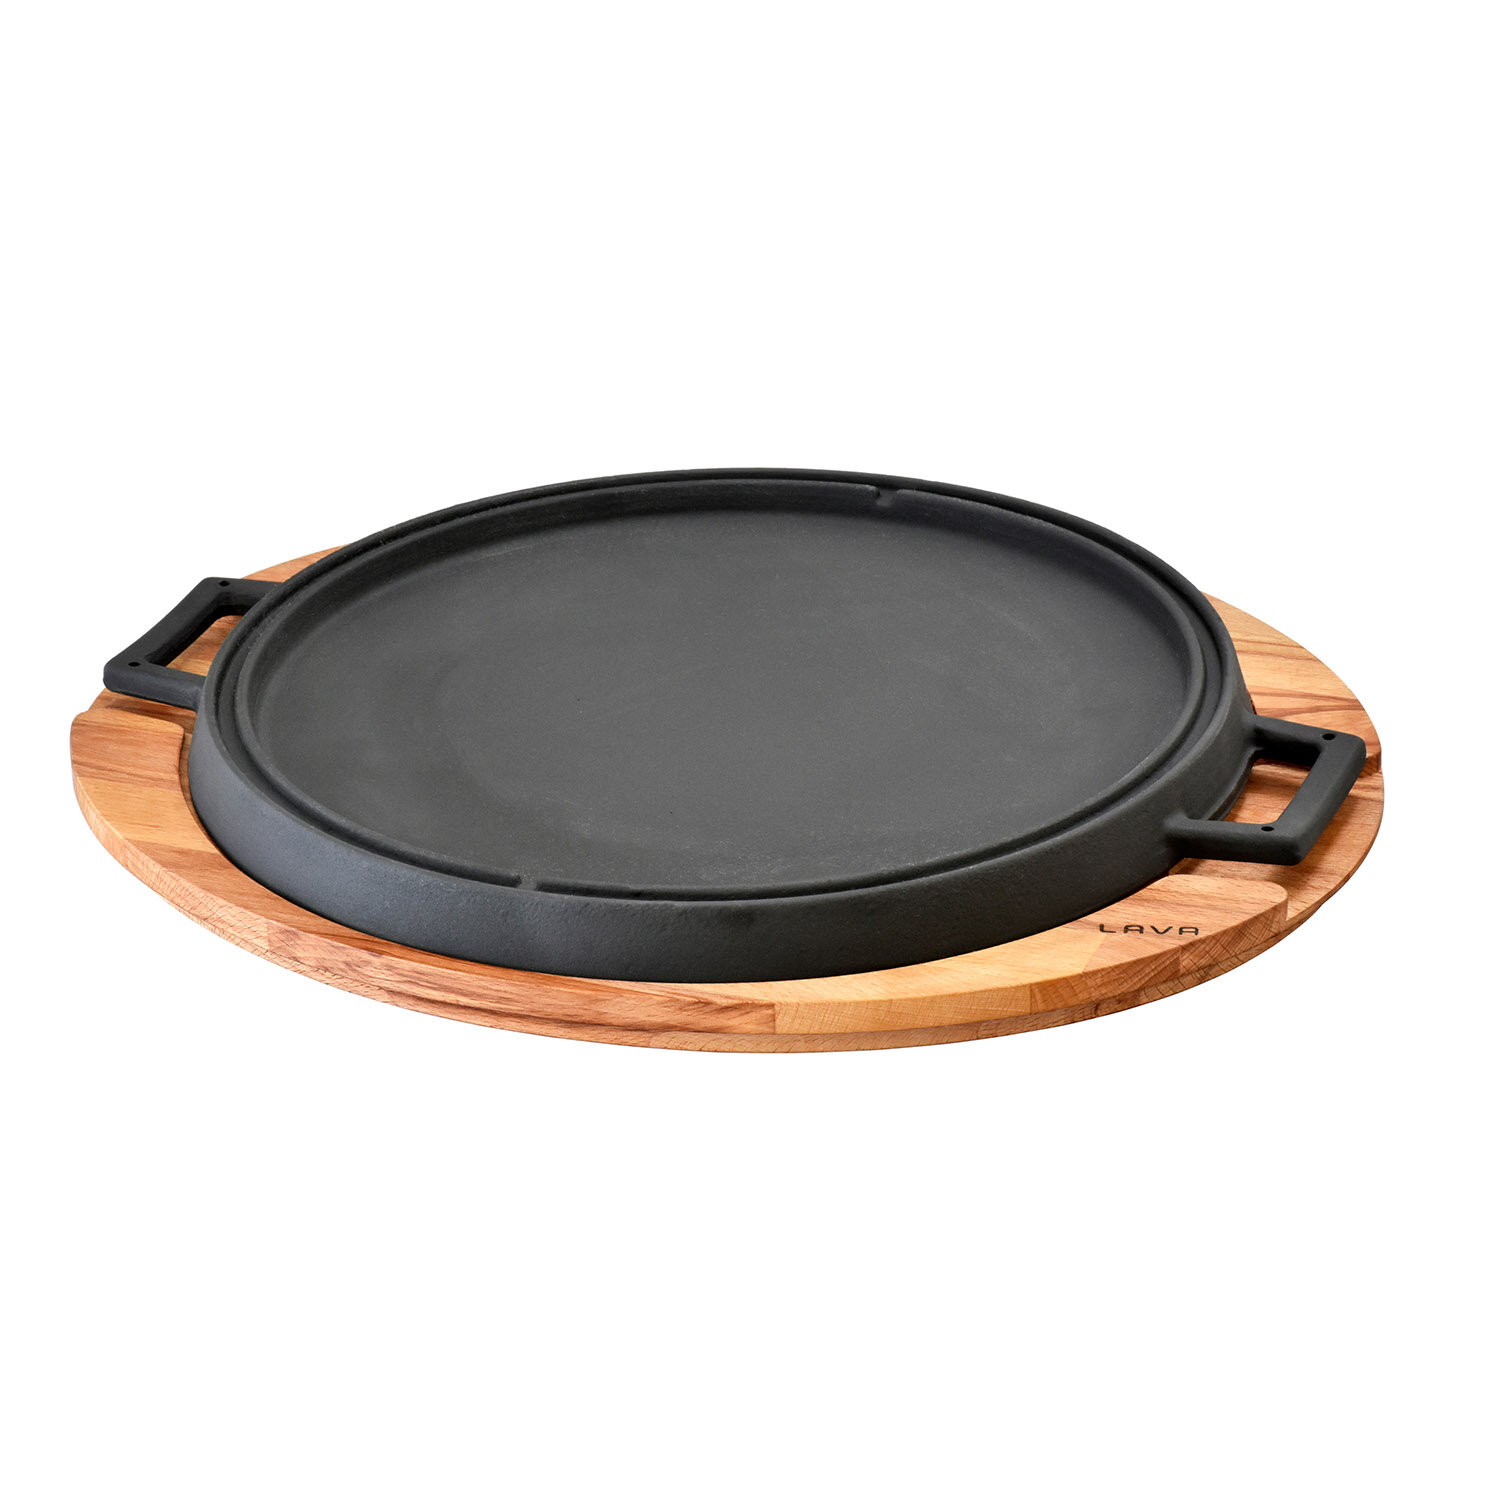 LAVA CAST IRON Lava Enameled Cast Iron BBQ Grill Pan 11 inch-Dual Side Round  with Beechwood Service Plate